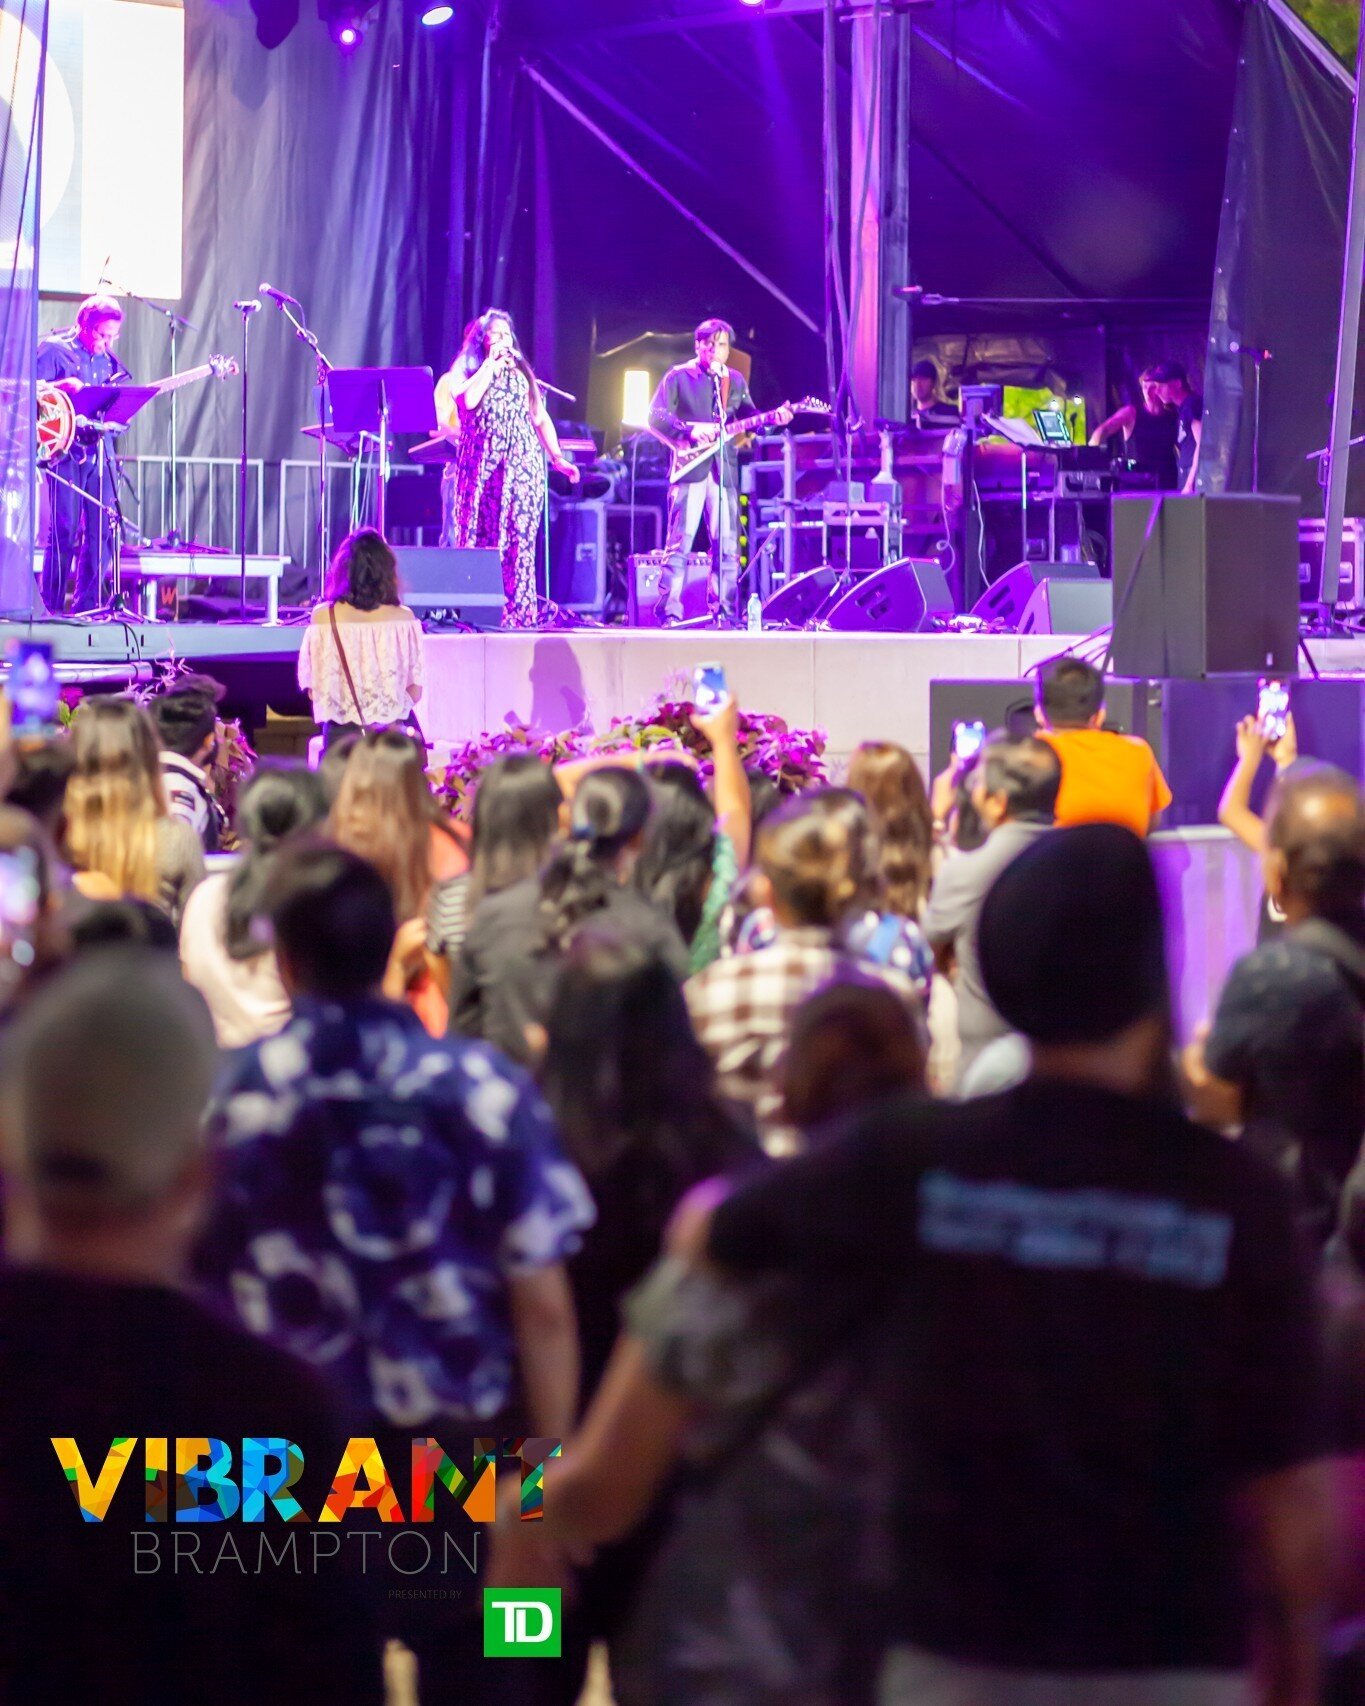 Shoutout to Raina Sen who put on an amazing live performance for everyone who came out to Vibrant Brampton, presented by @td_canada! 🎉🎉

Photography by: Boss Culture &amp; @creatorsatplay 
. 
.
.
.
#VibrantBrampton #VibrantStar #Brampton #multicult